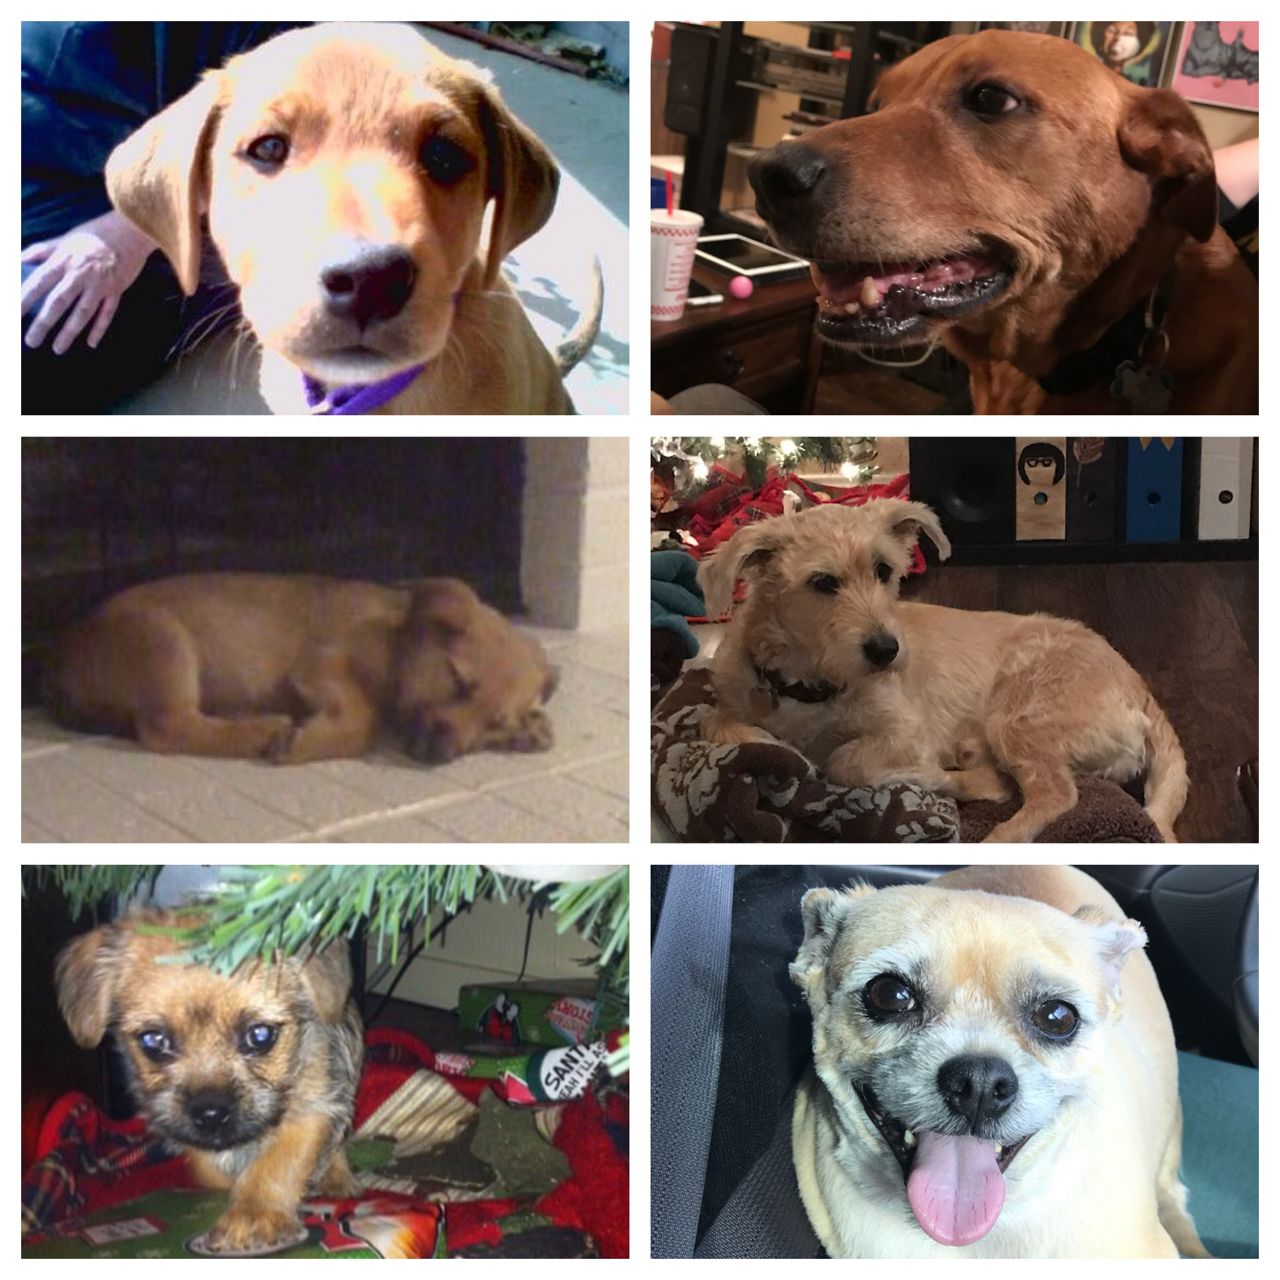 Spectrum News executive producer Alan Waltrip compiled this collage of his dogs as puppies on the left and as adults on the right. 